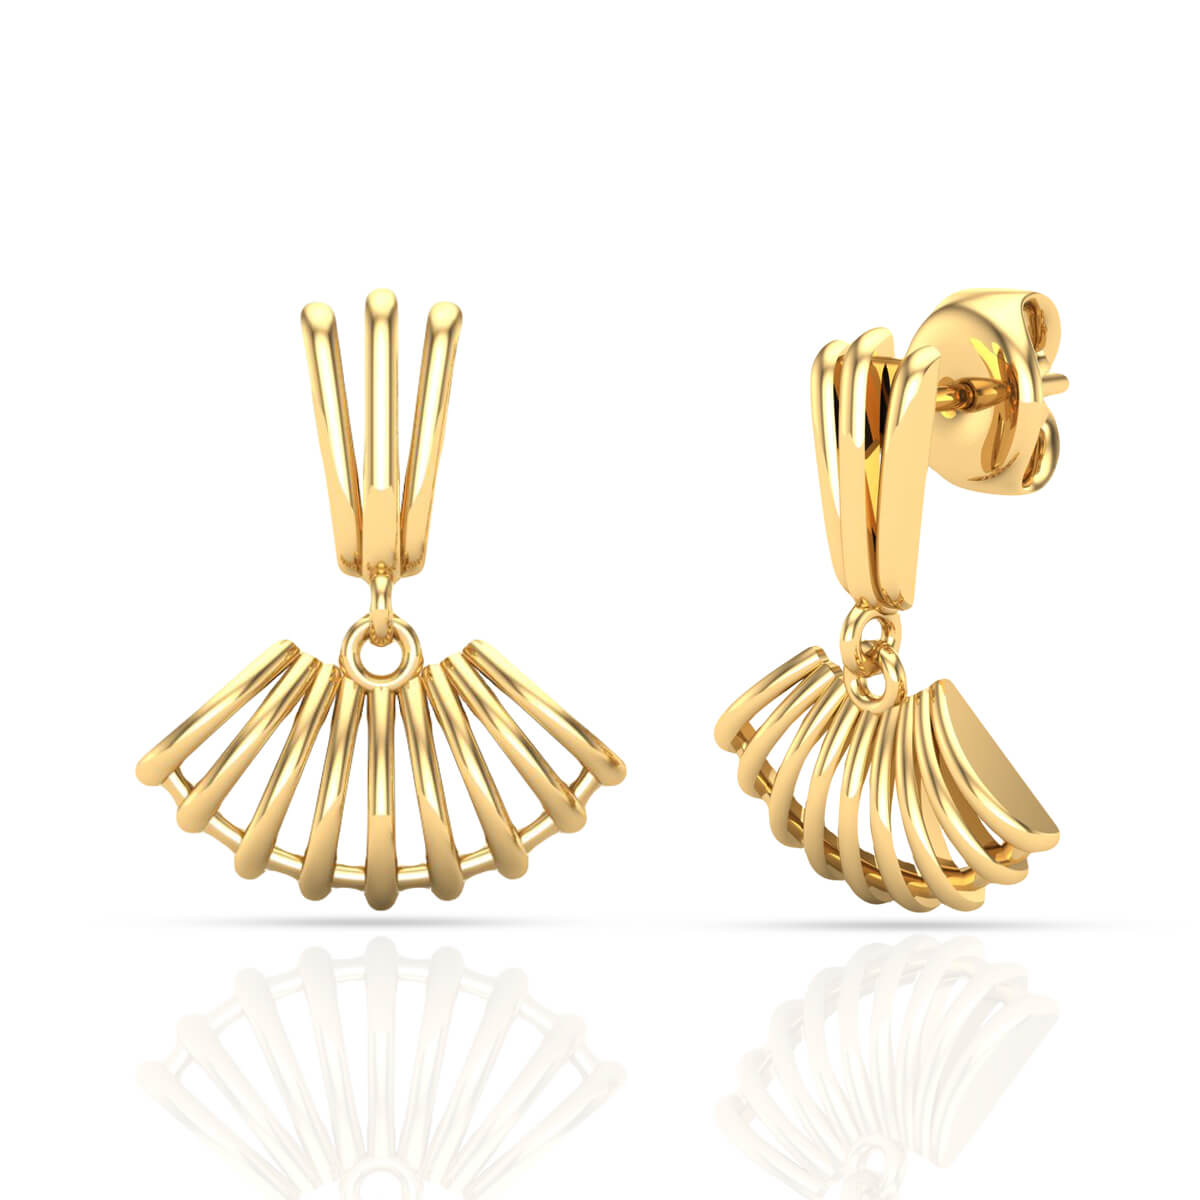 Gold Earrings Wholesalers & Wholesale Dealers in India-sgquangbinhtourist.com.vn